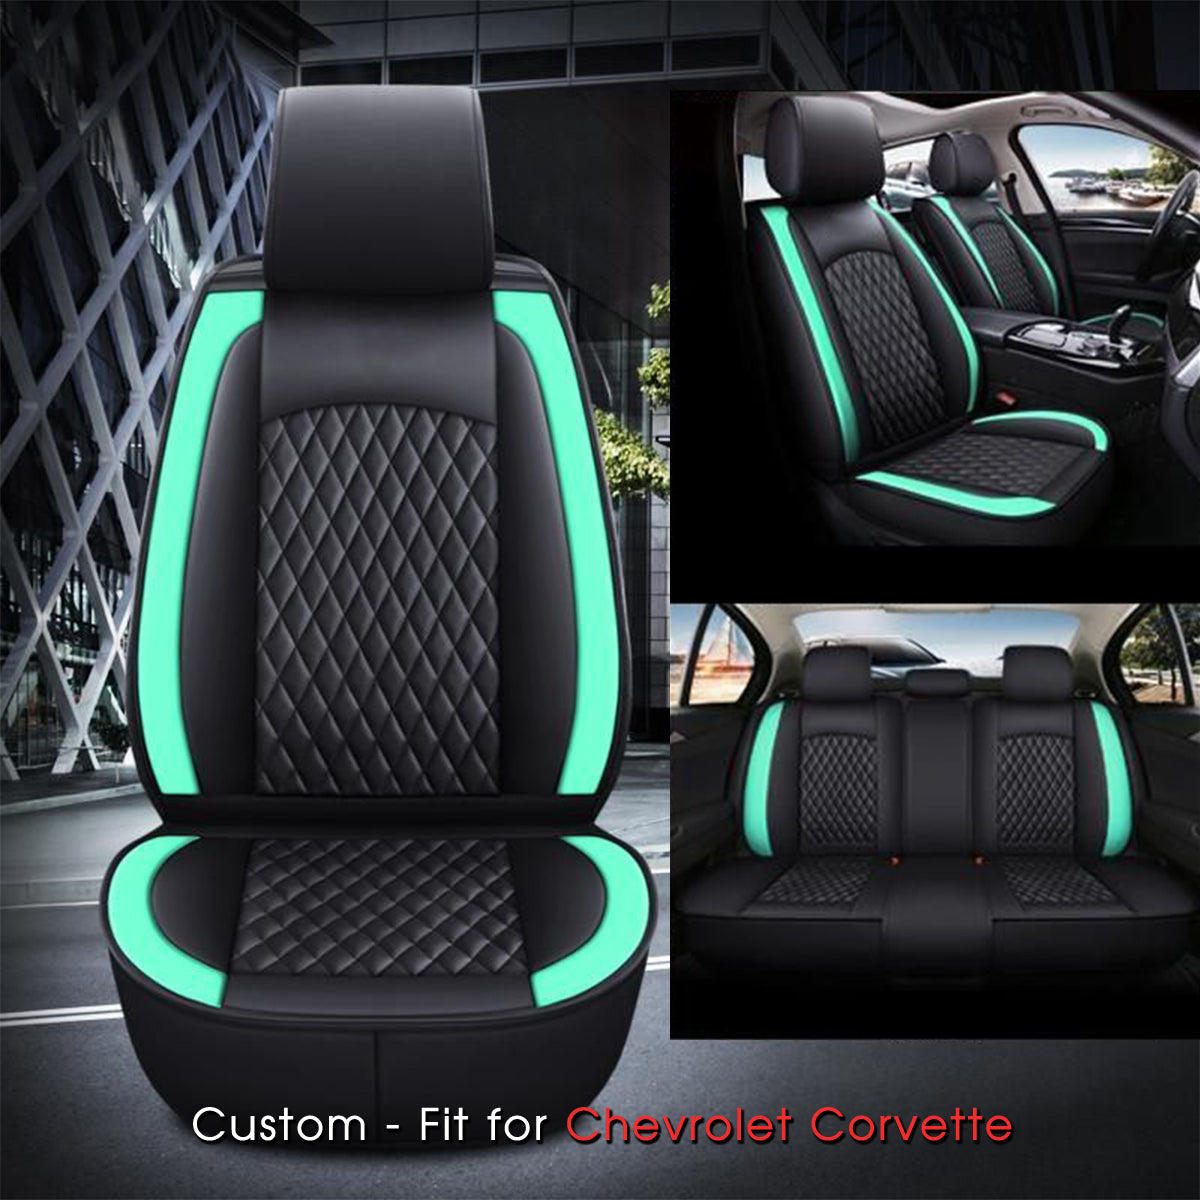 2 Car Seat Covers Full Set, Custom-Fit For Car, Waterproof Leather Front Rear Seat Automotive Protection Cushions, Car Accessories WACC211